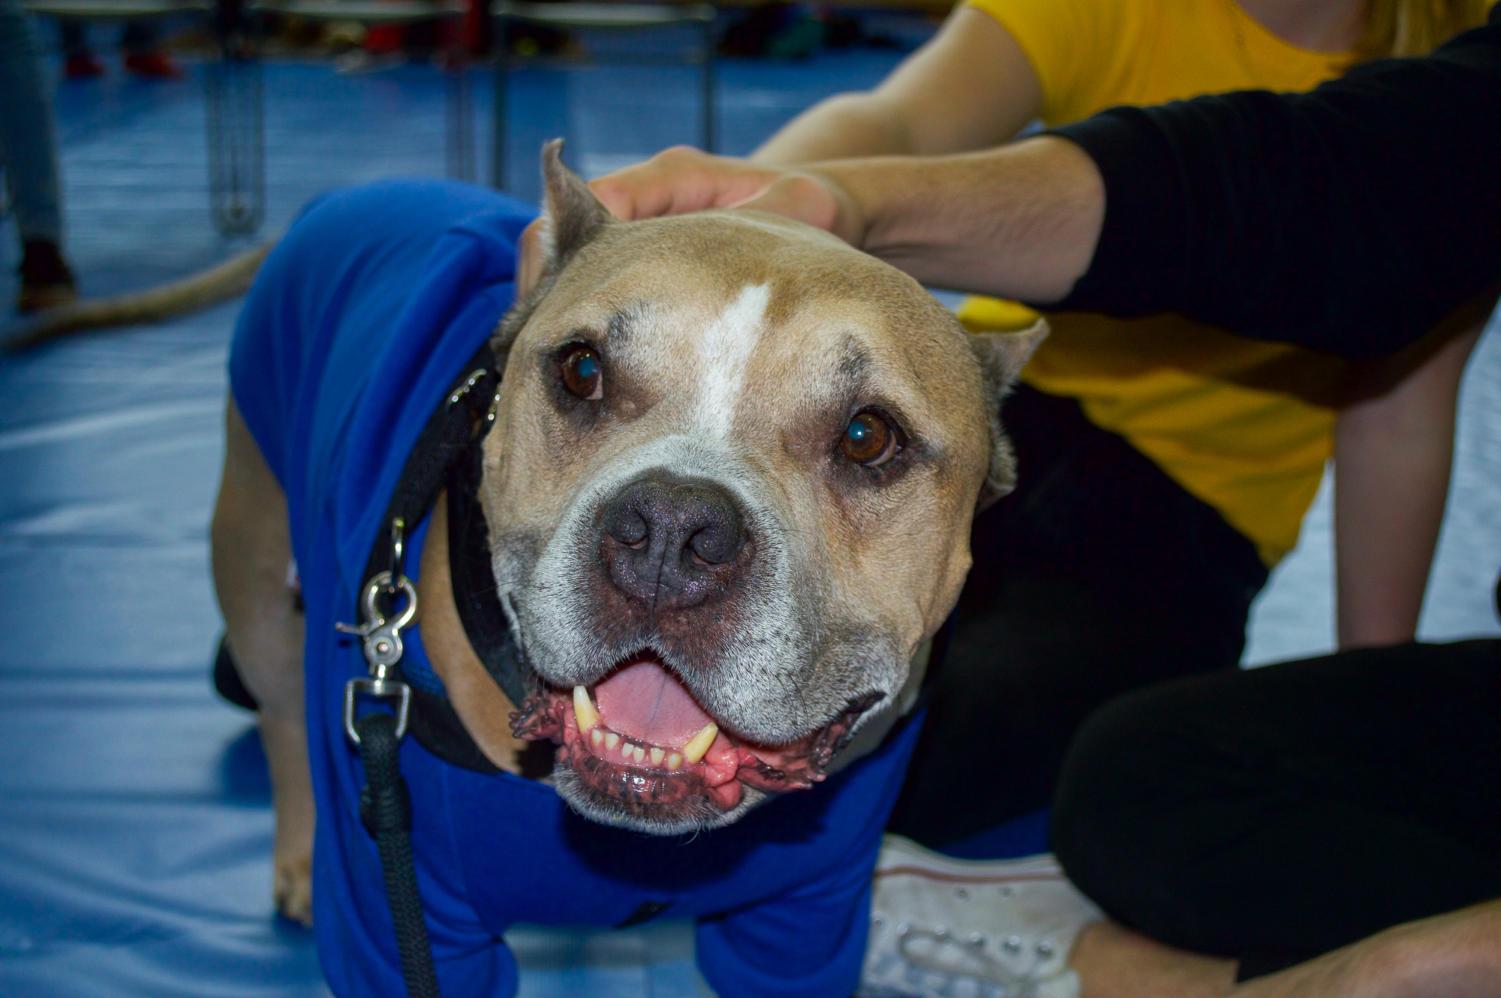 Certified therapy dog, JJ, an American Staffordshire Terrier, is a certified therapy dog who helps people overcome stressors in their lives. The dog posed with students at ASI's "Puppy Therapy" event for pictures and offered a friendly smile for the camera.